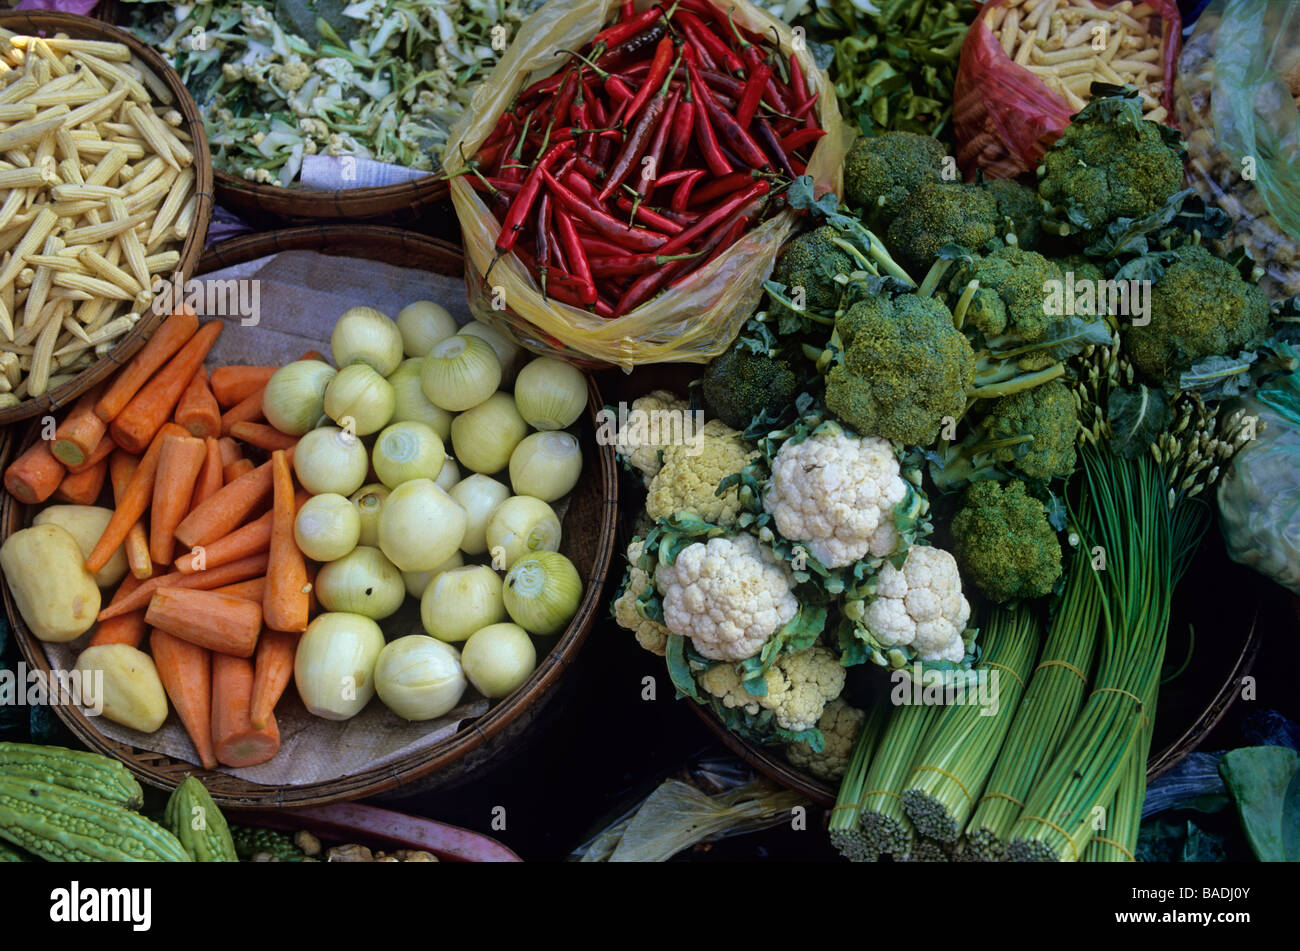 Cambodia, Phnom Penh, market, close up on a vegetable stall Stock Photo